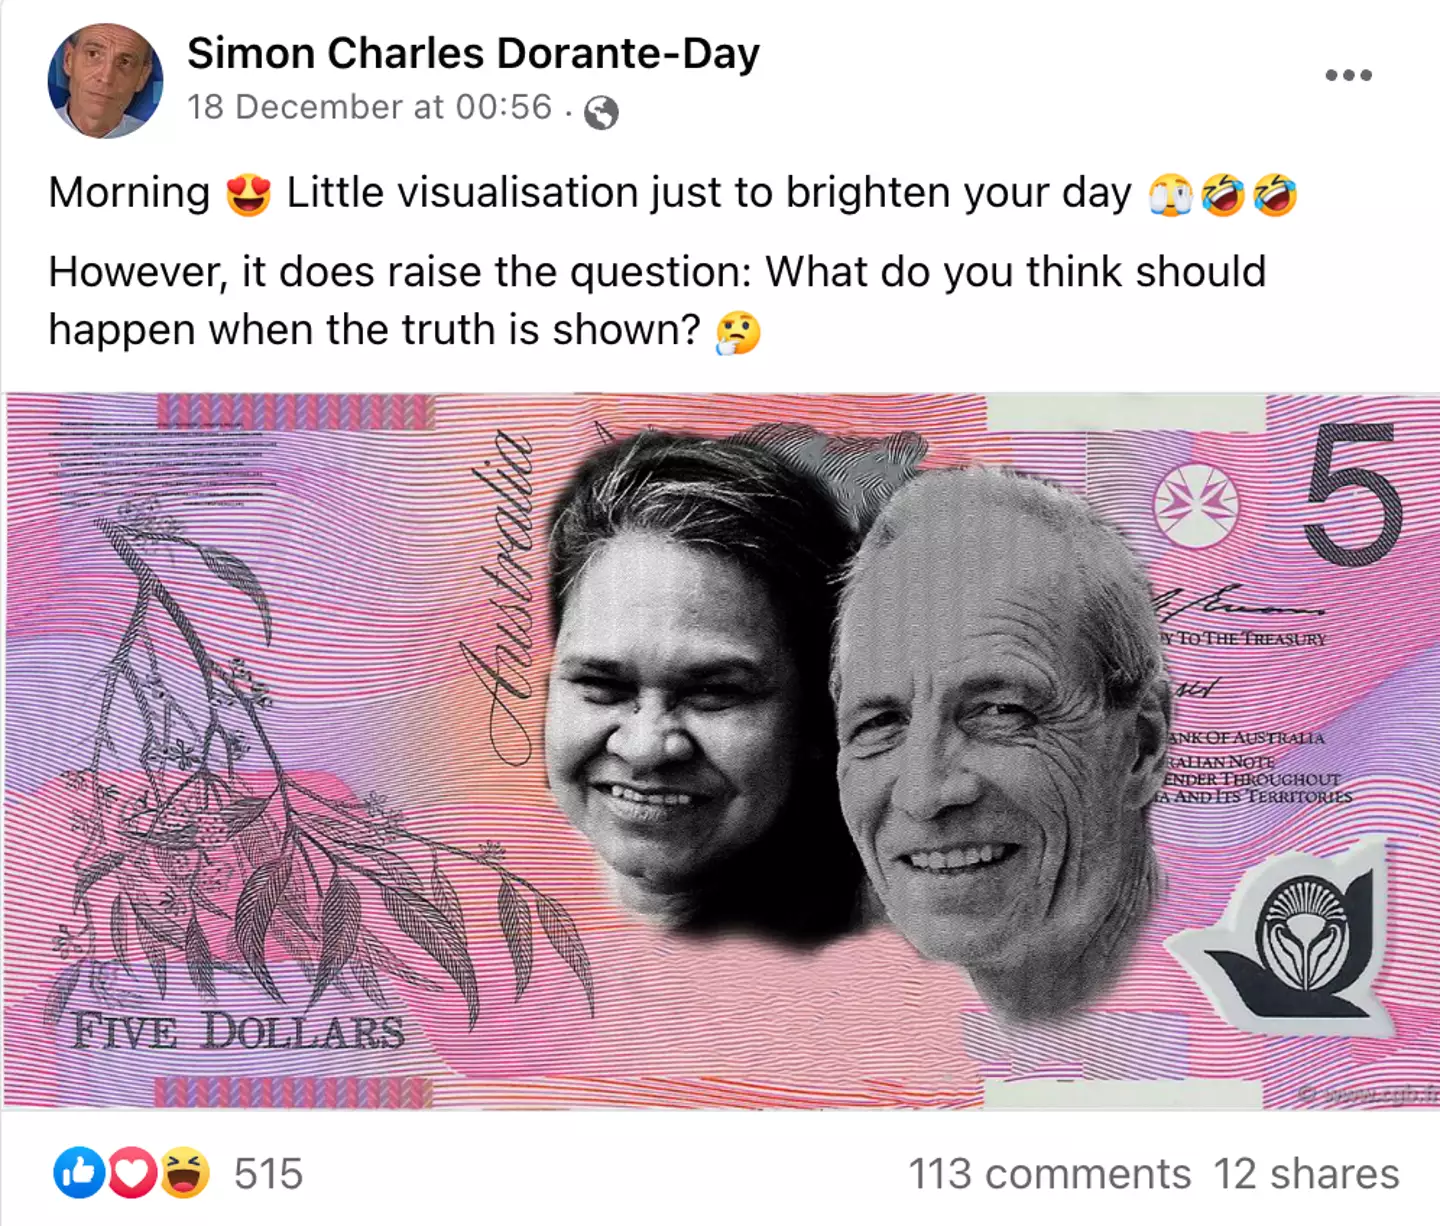 Dorante-Day posted a picture of a photograph of him and his wife on top of an Australian five dollar note.